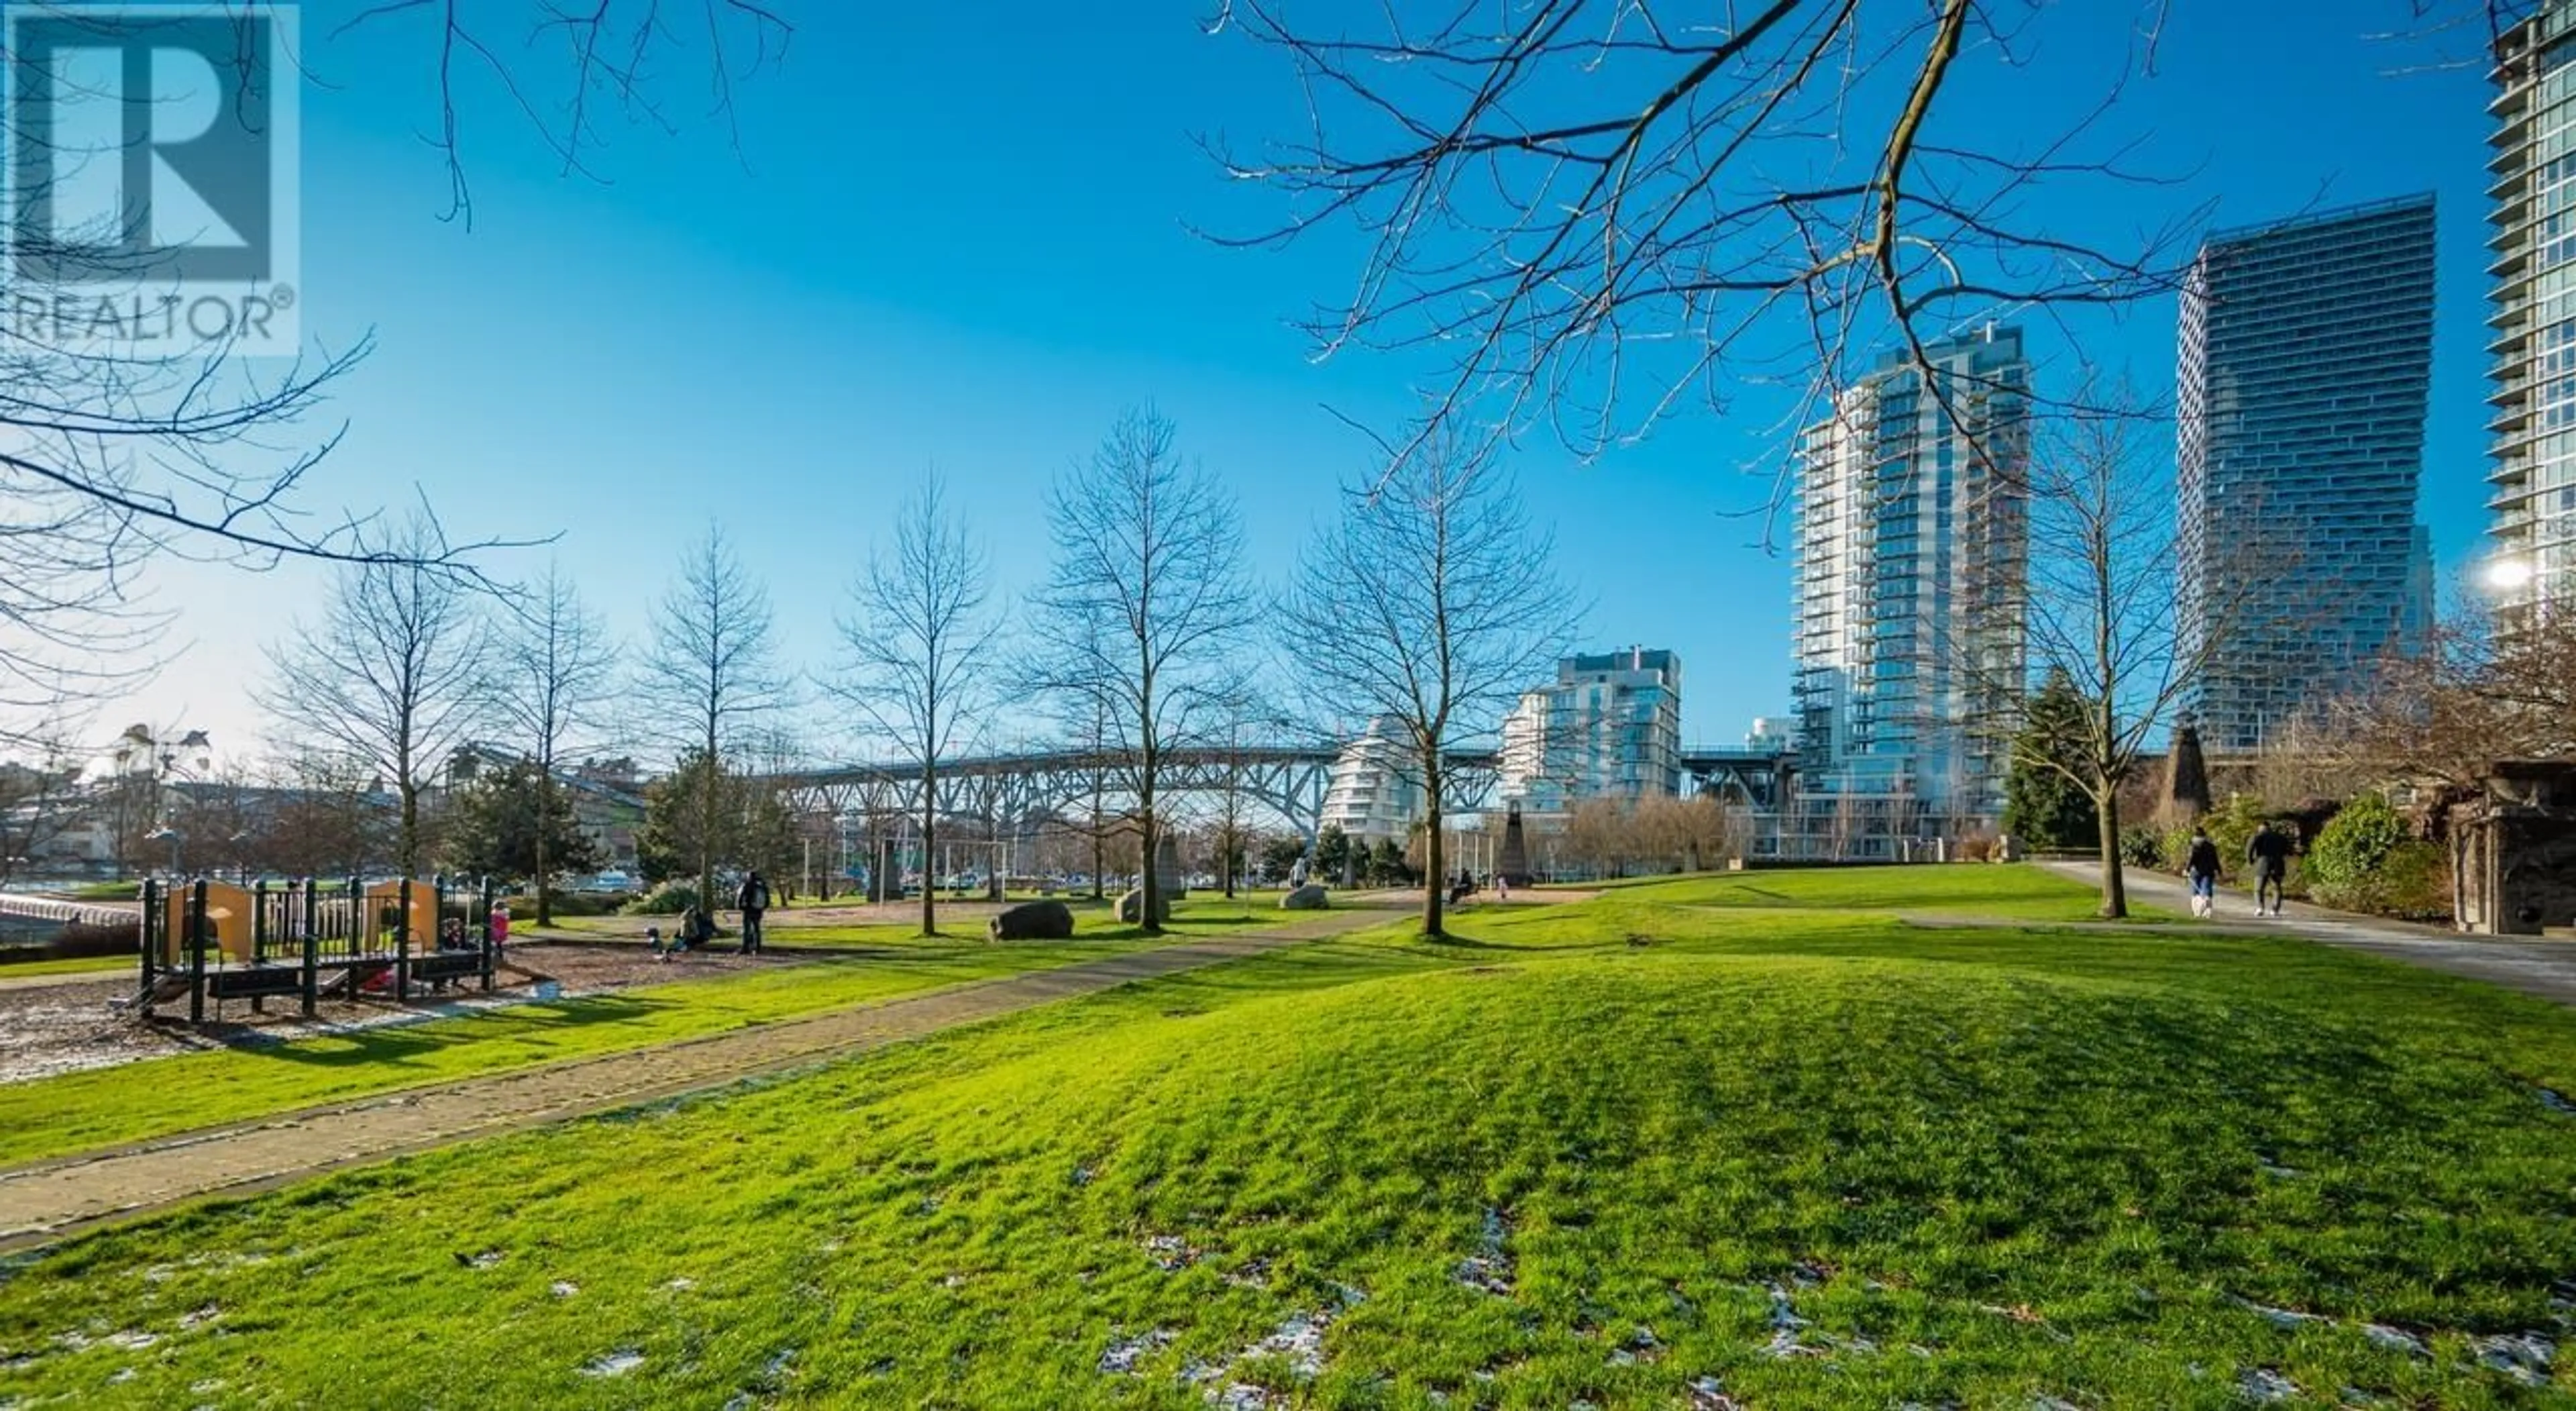 A pic from exterior of the house or condo for 703 1408 STRATHMORE MEWS, Vancouver British Columbia V6Z3A9